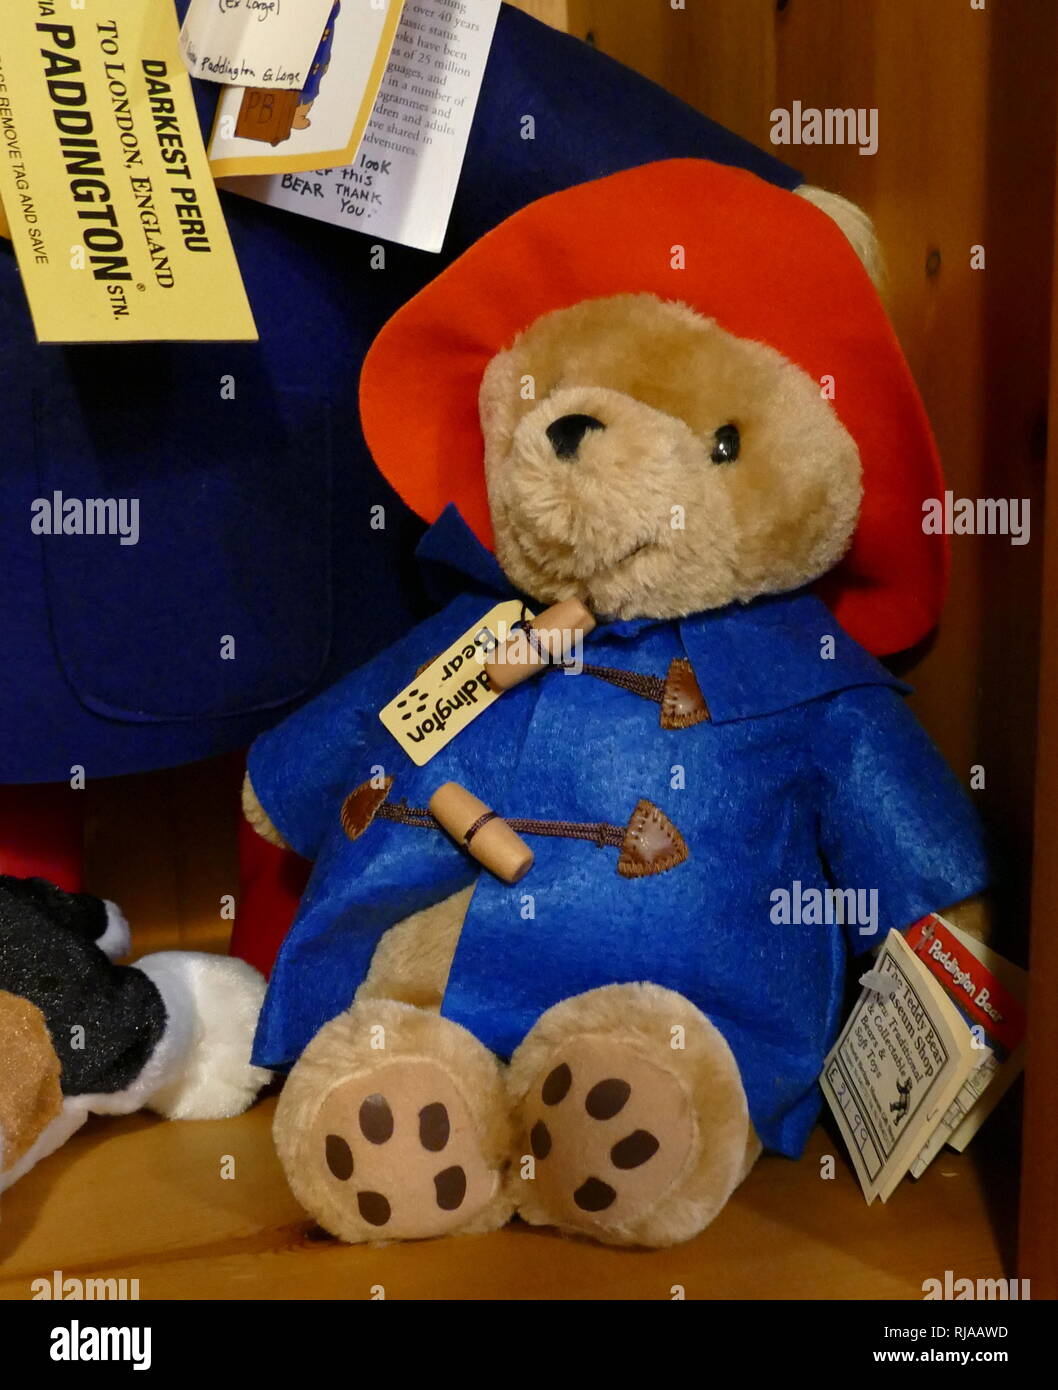 Paddington Bear is a fictional character in children's literature. He first appeared on 13 October 1958 in the children's book A Bear Called Paddington and has been featured in more than twenty books written by British author Michael Bond and illustrated by Peggy Fortnum and other artists Stock Photo